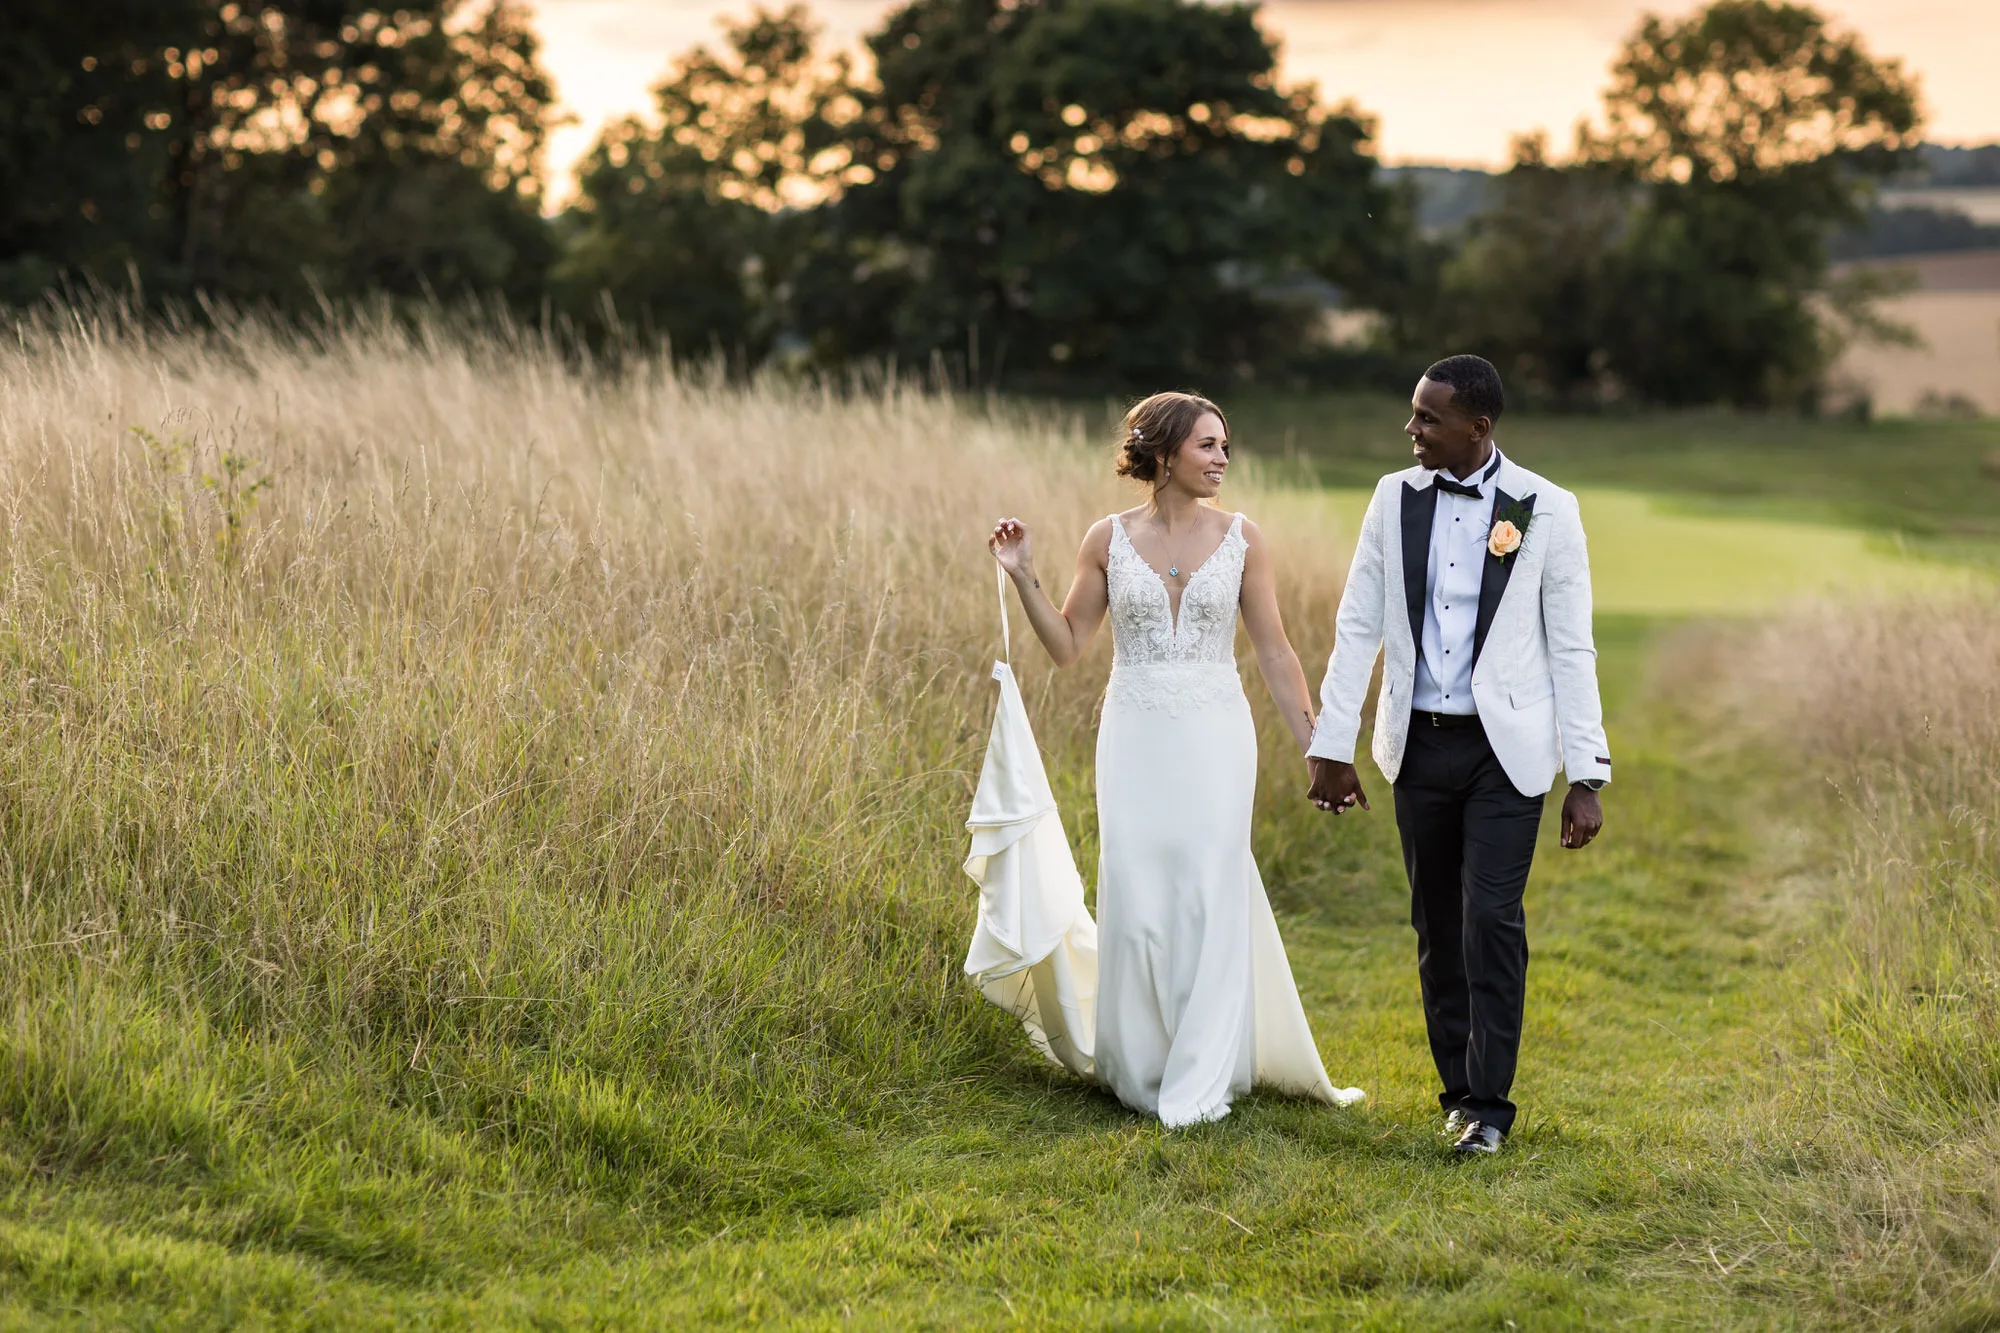 documentary style wedding photography - bride and groom, walking in fields with sunset in the background.